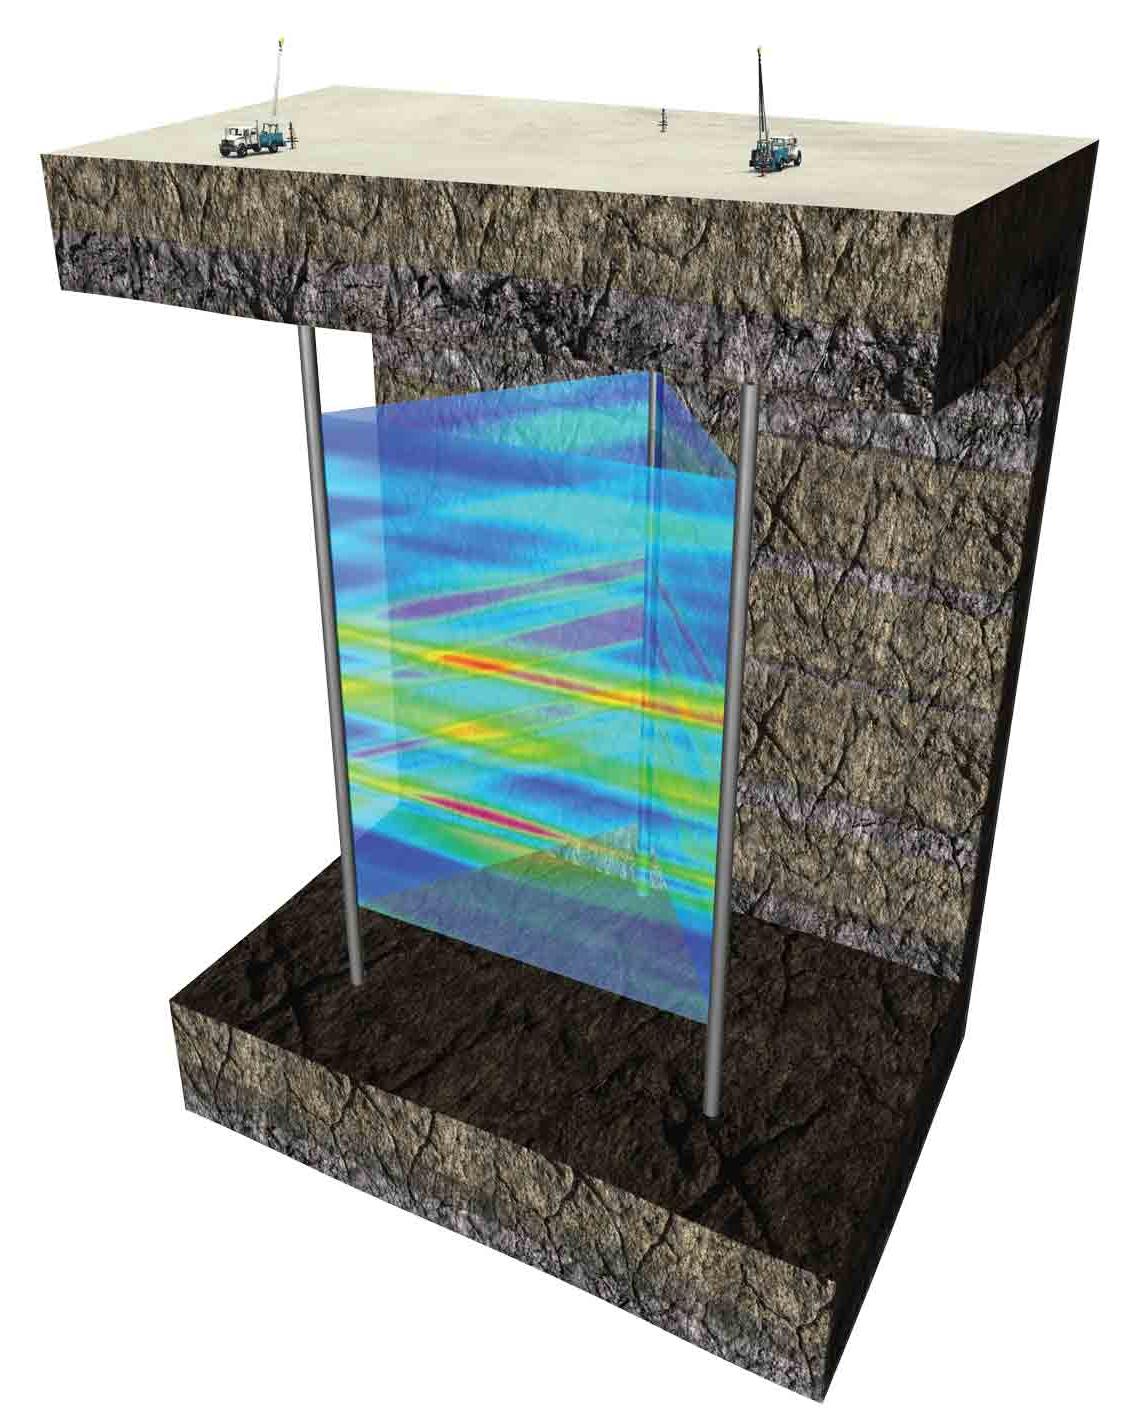  The DeepLook-EM crosswell acquisition system directly measures the resistivity of the reservoir between wells up to 3,280 ft apart.